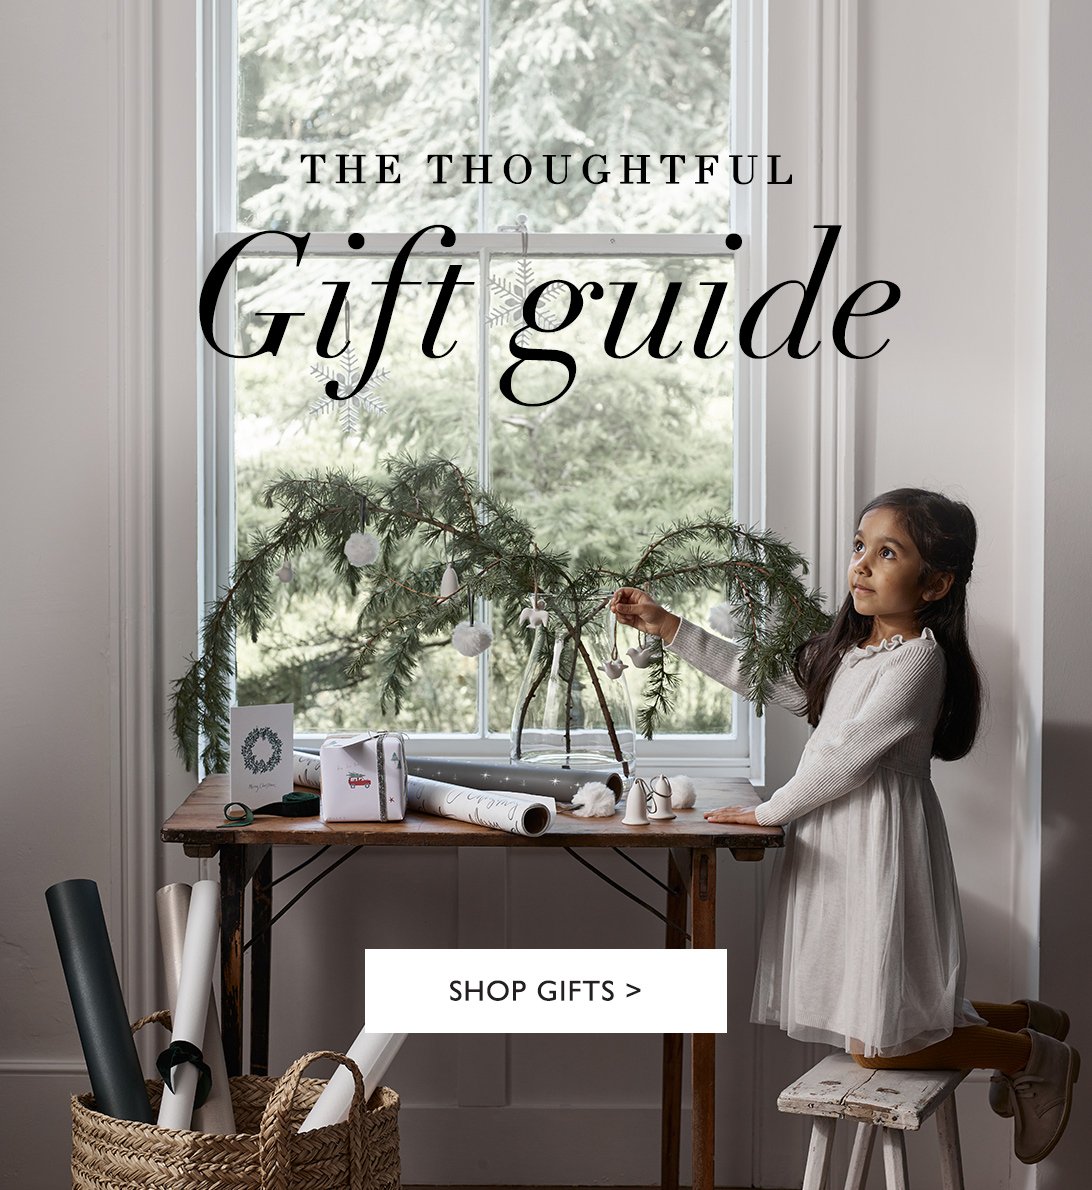 THE THOUGHTFUL Gift guide | SHOP GIFTS